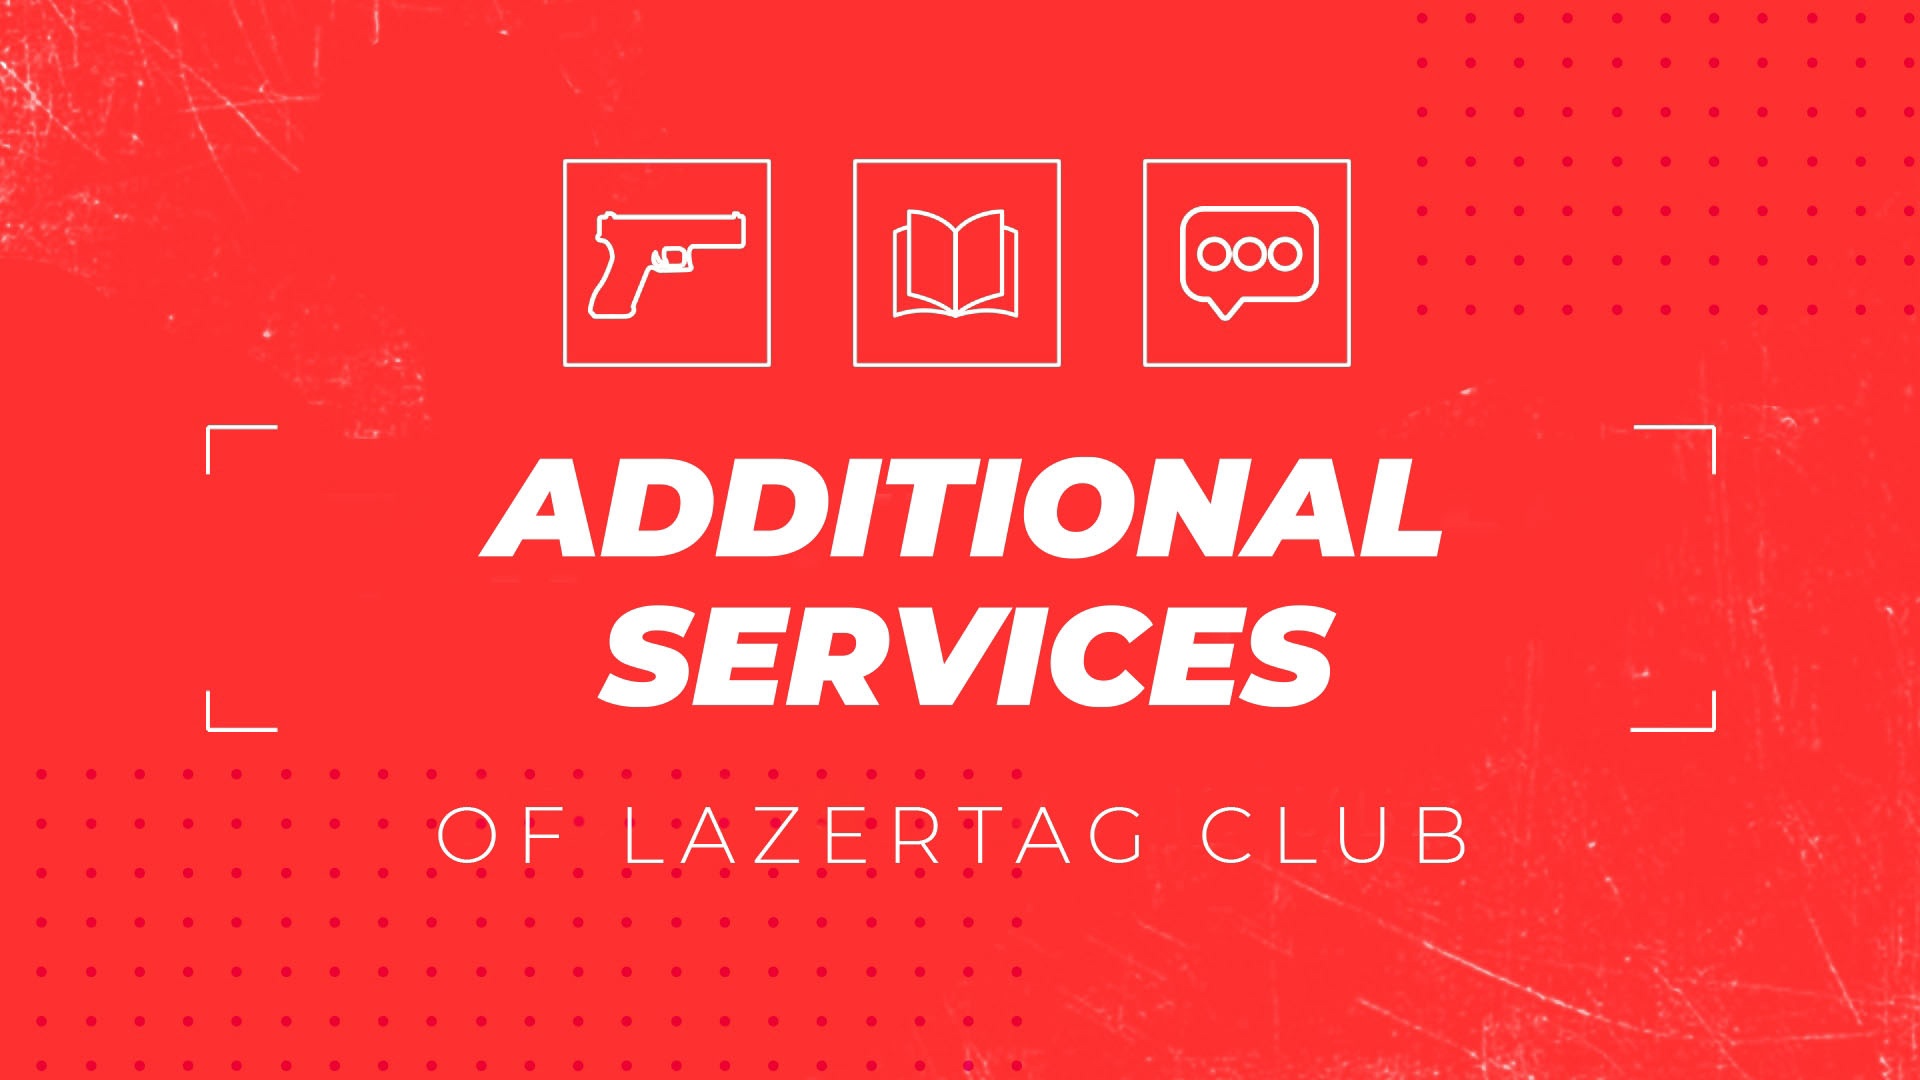 Additional services of laser tag club. Rising average price